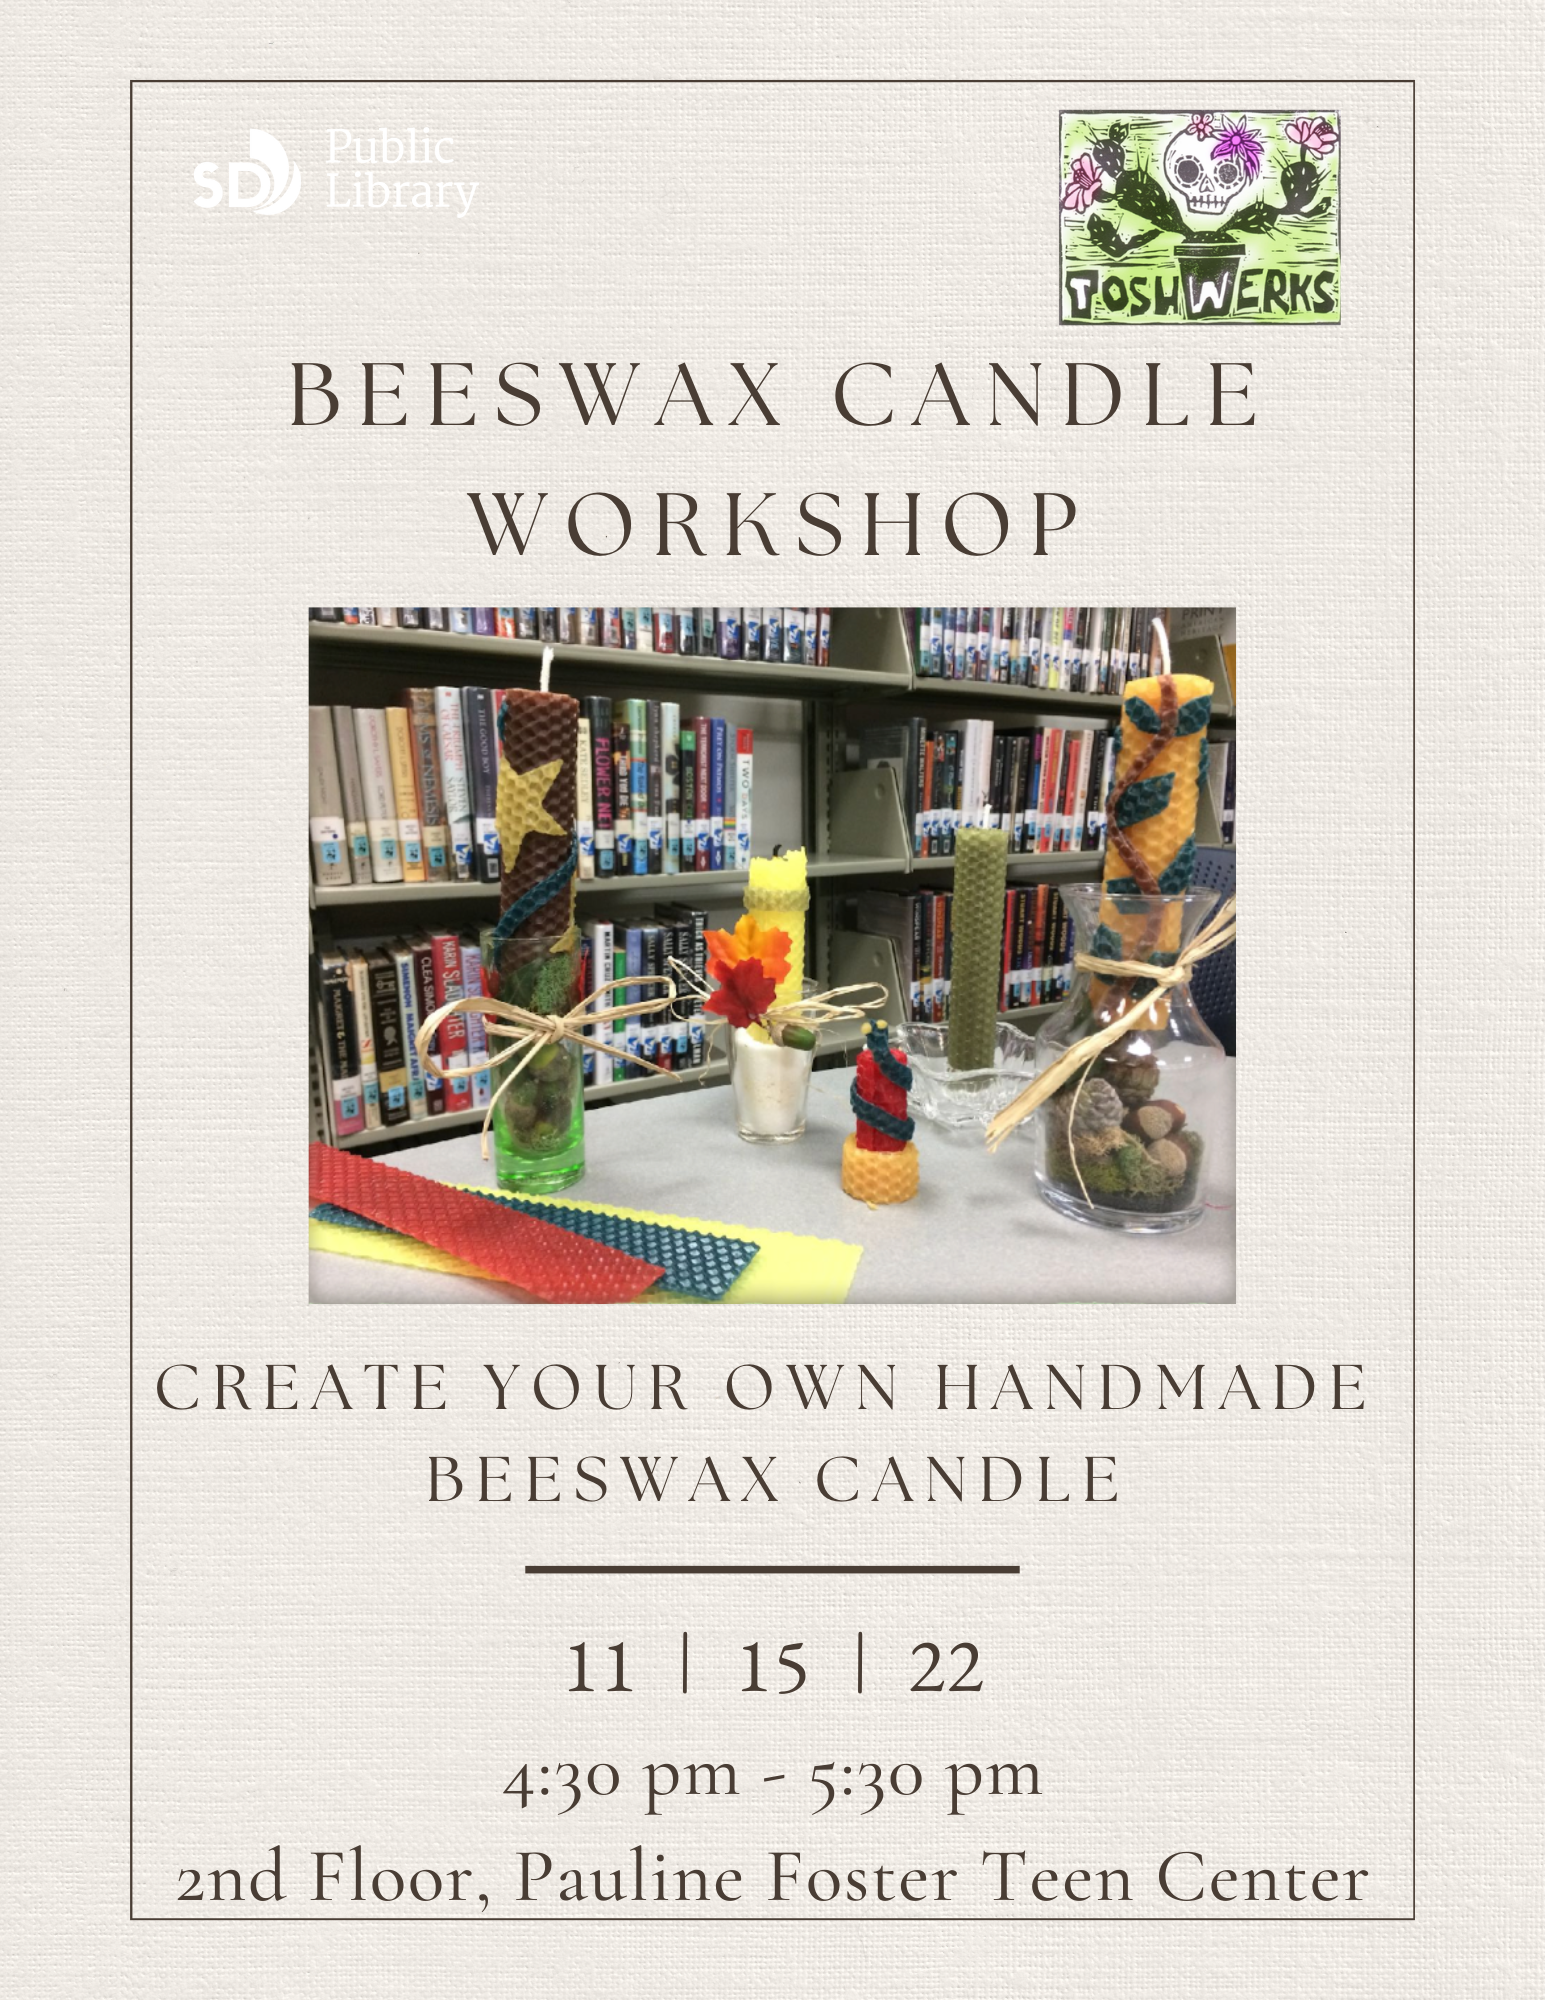 Beeswax Candle Workshop. Create your own handmade beeswax candle. 11/15/2022. 4:30pm-5:30pm. 2nd floor, Pauline Foster Teen Center.